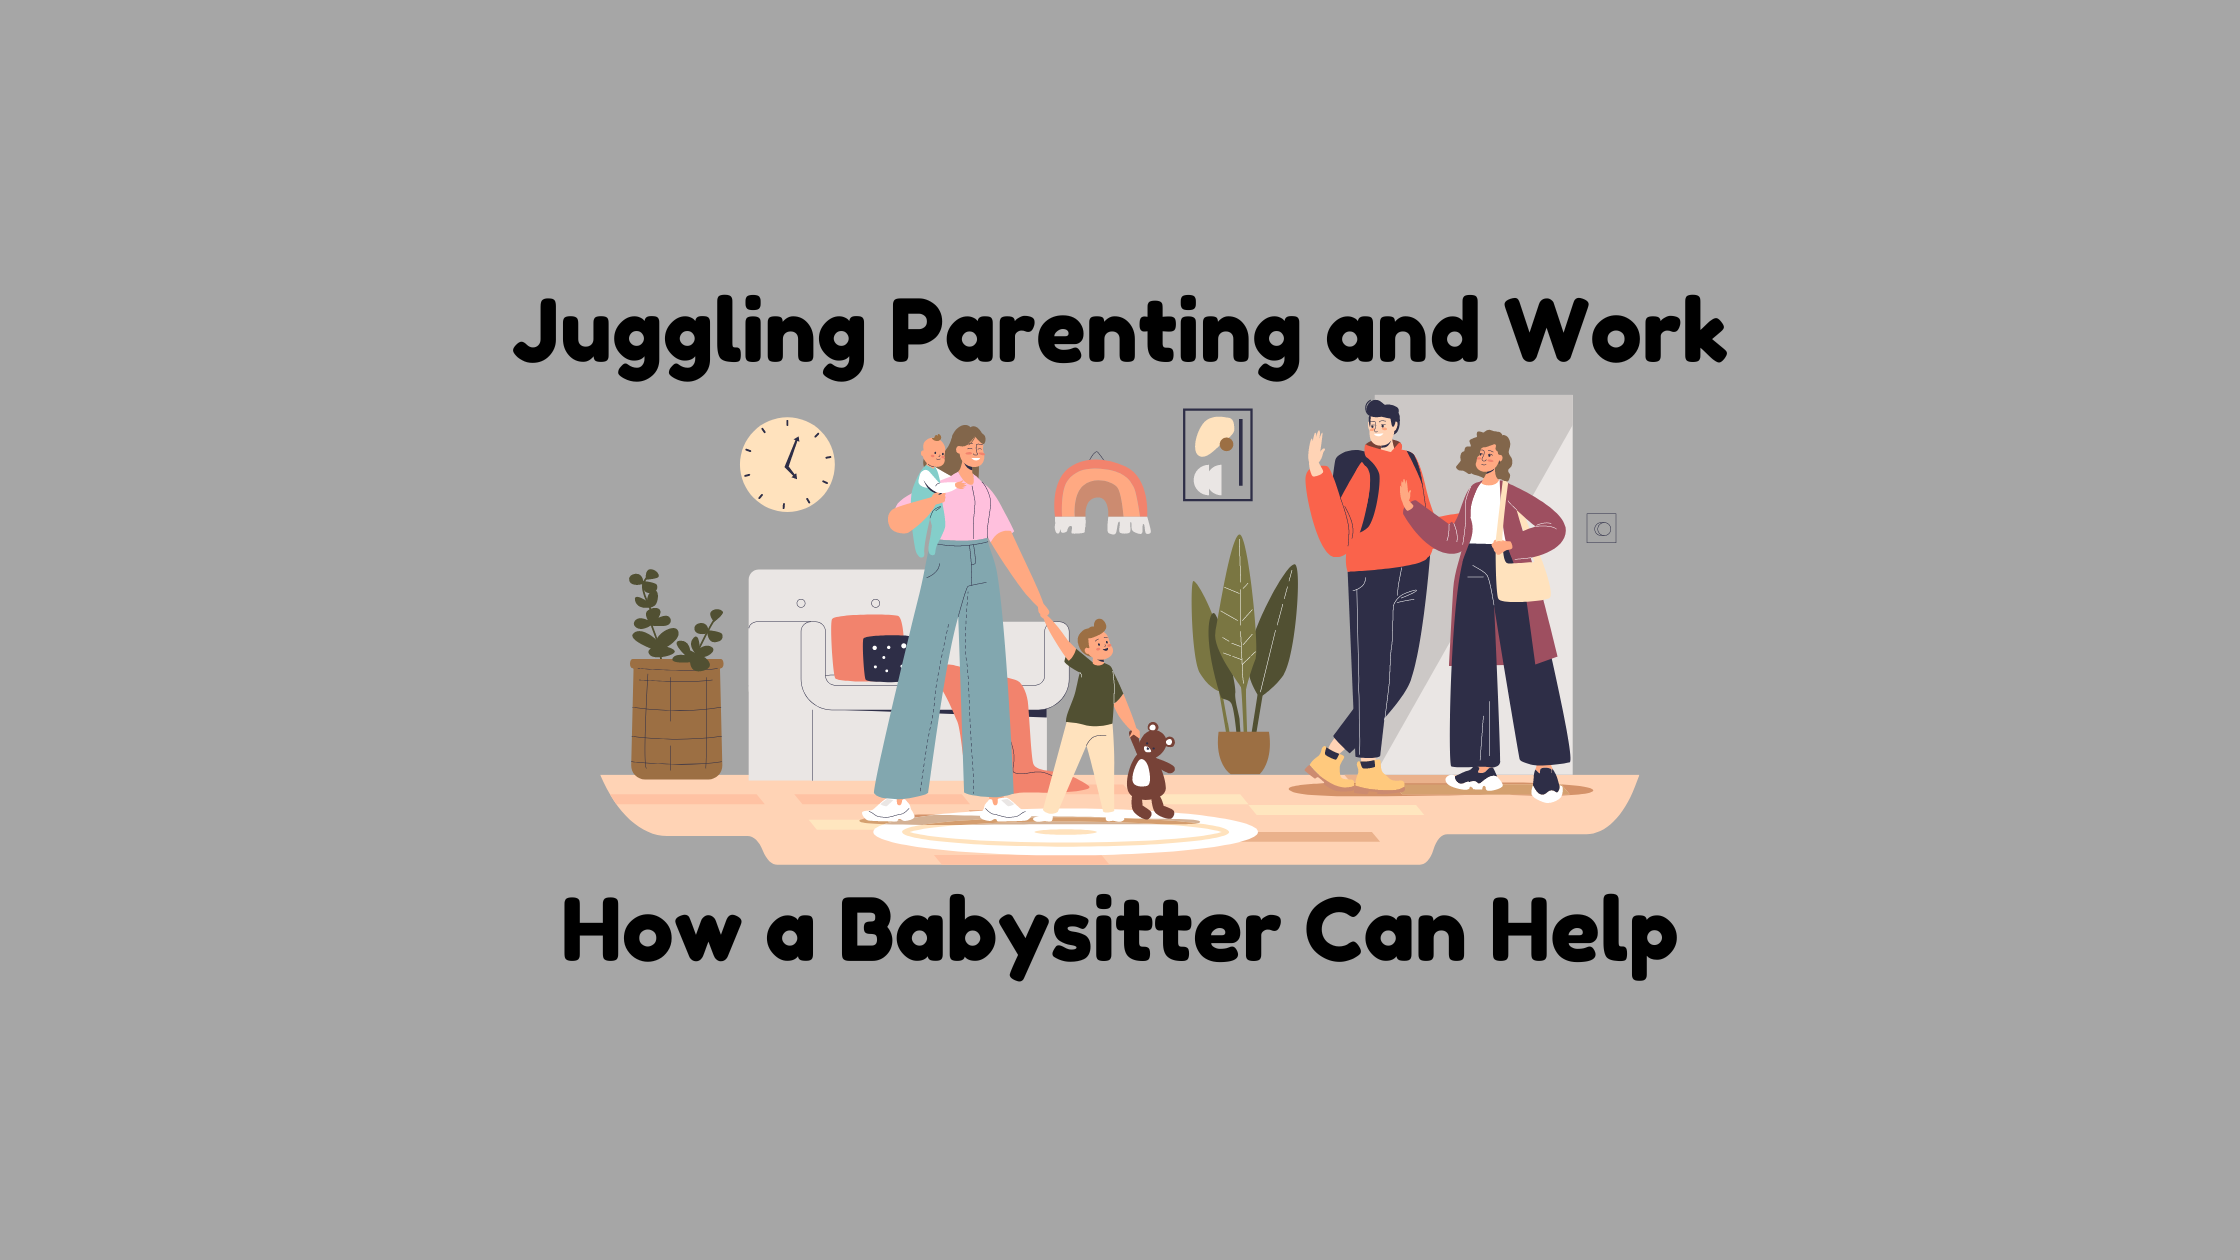 Illustration of parents leaving home while a babysitter engages with a child, representing the theme of juggling parenting and work. The image is titled "Juggling Parenting and Work: How a Babysitter Can Help," and is associated with the company Little Bugzz.